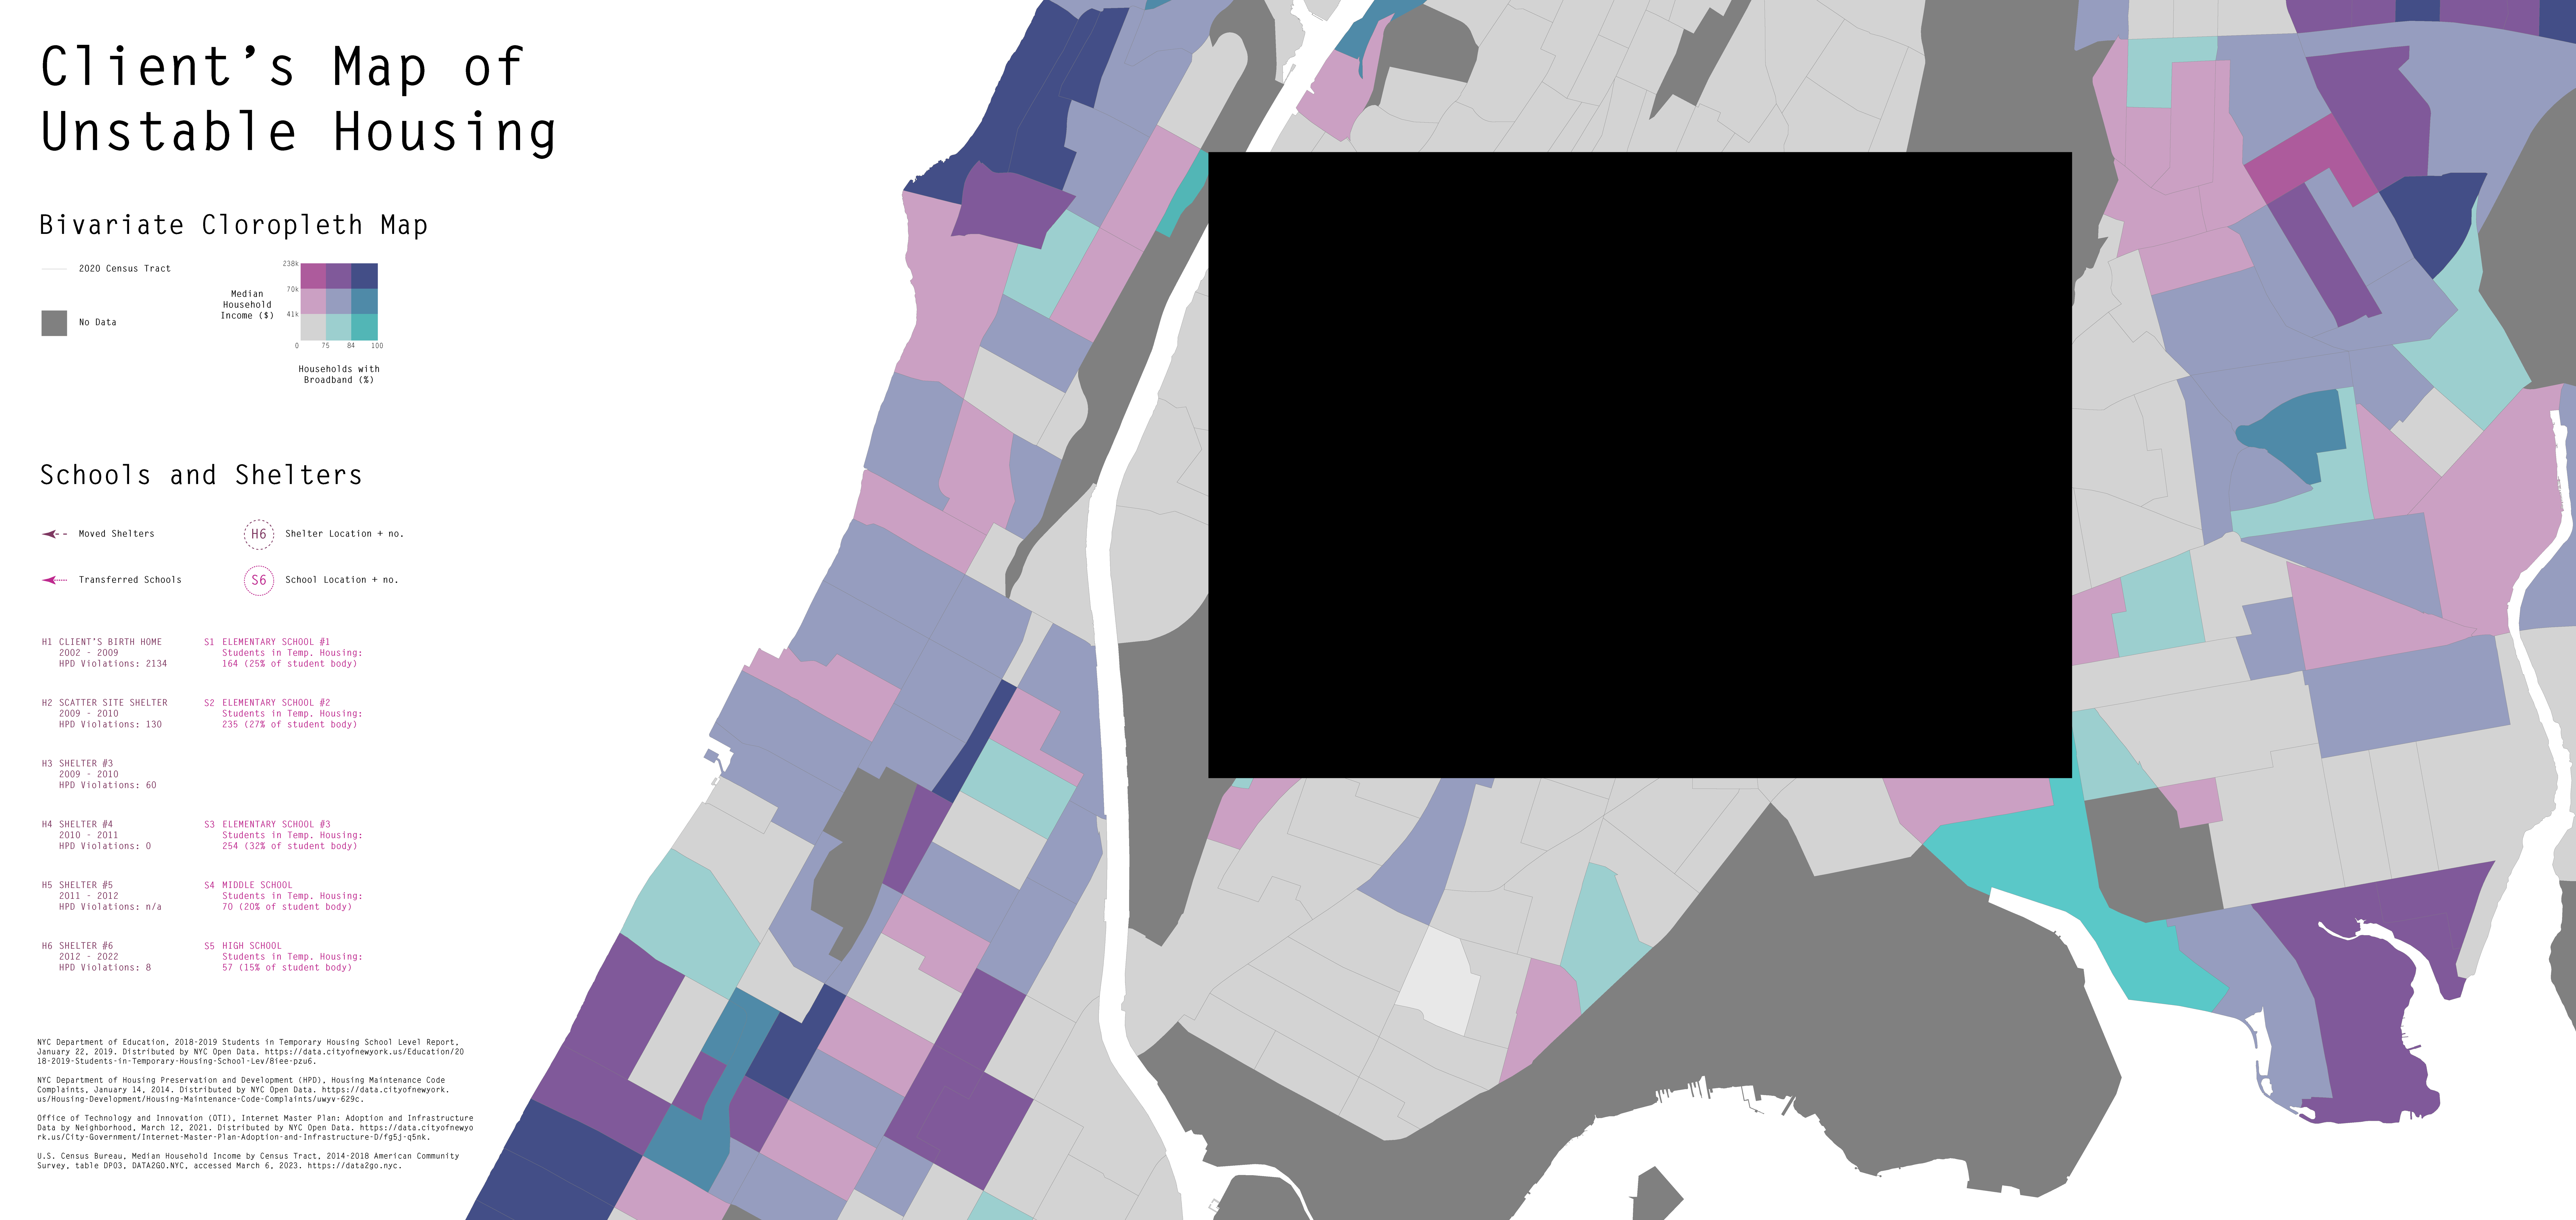 This is a version of the previous bivariate map zoomed in to the South Bronx that originally showed six approximate locations of the shelters that the client lived in and five locations of the schools he attended, connected in sequence and juxtaposed on the previous map. The chaos map was meant to illustrate the instability experience by the client, but as this information is confidential, the map has been censored.